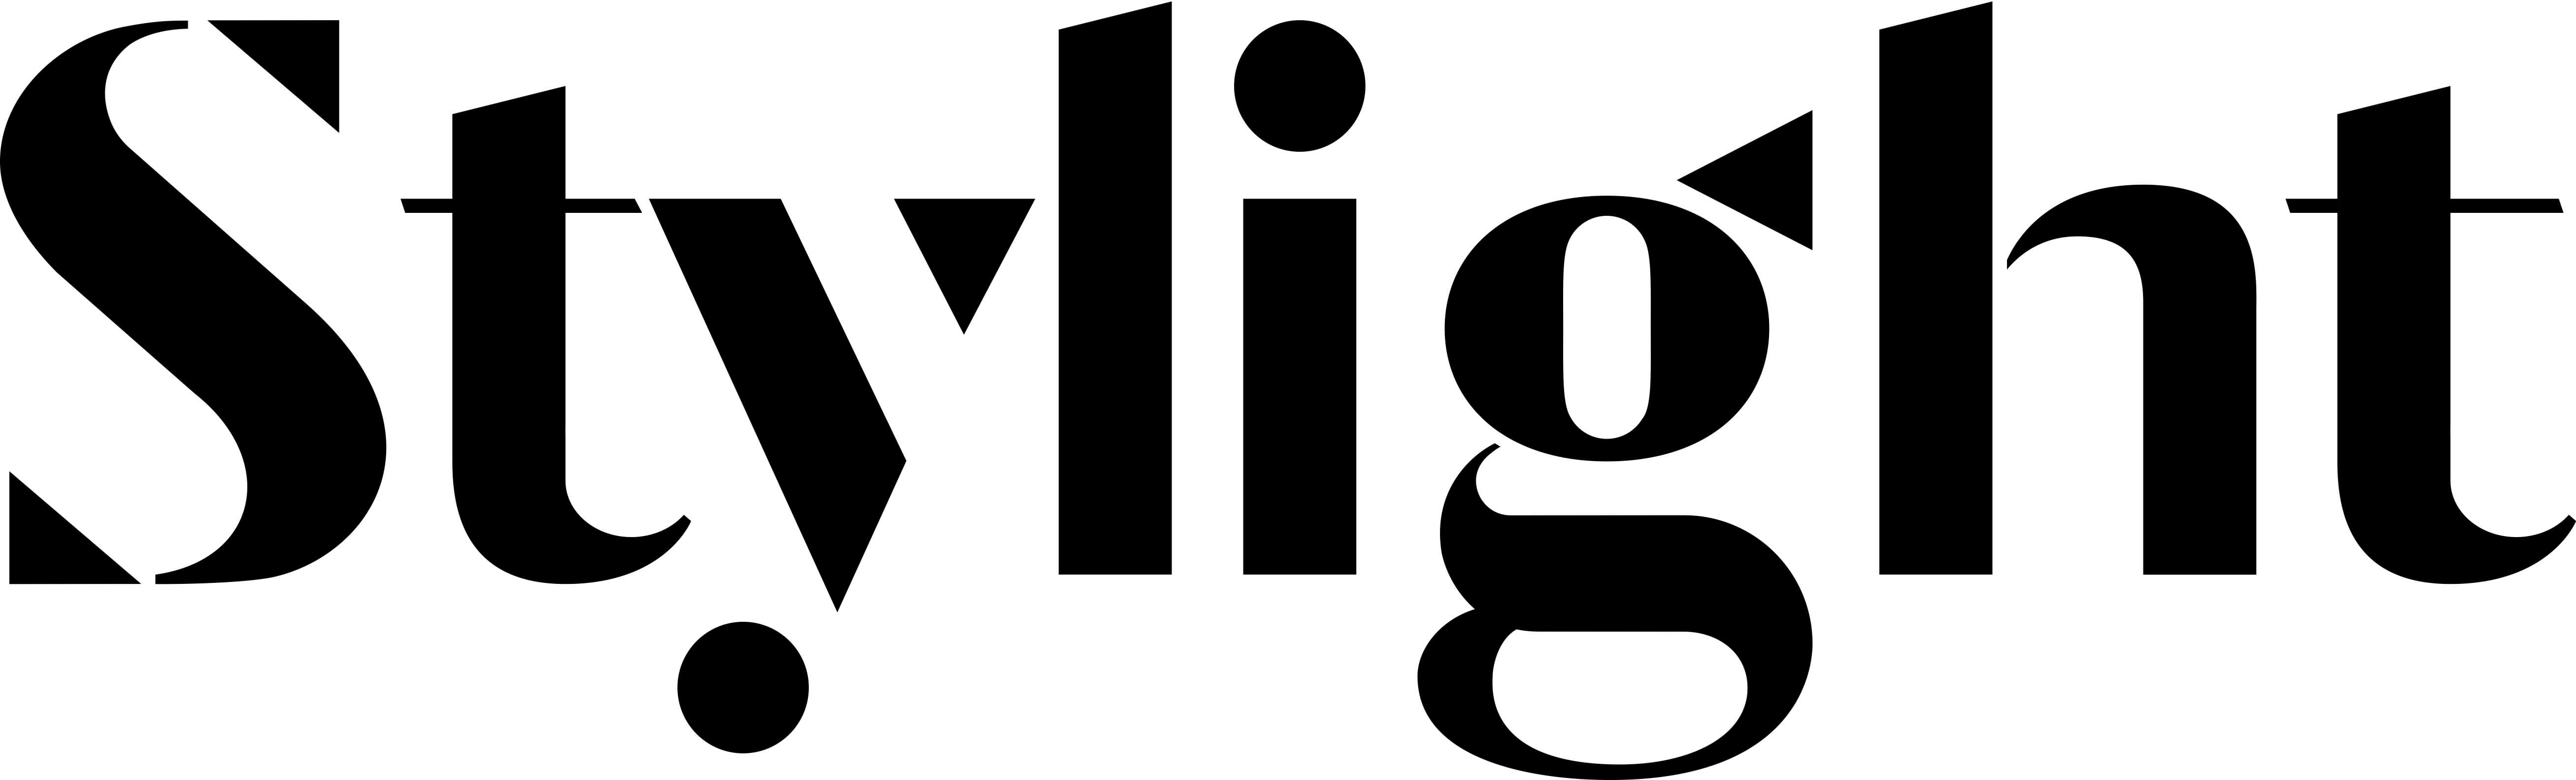 Stylight Enters Canadian Market with New Domain Name